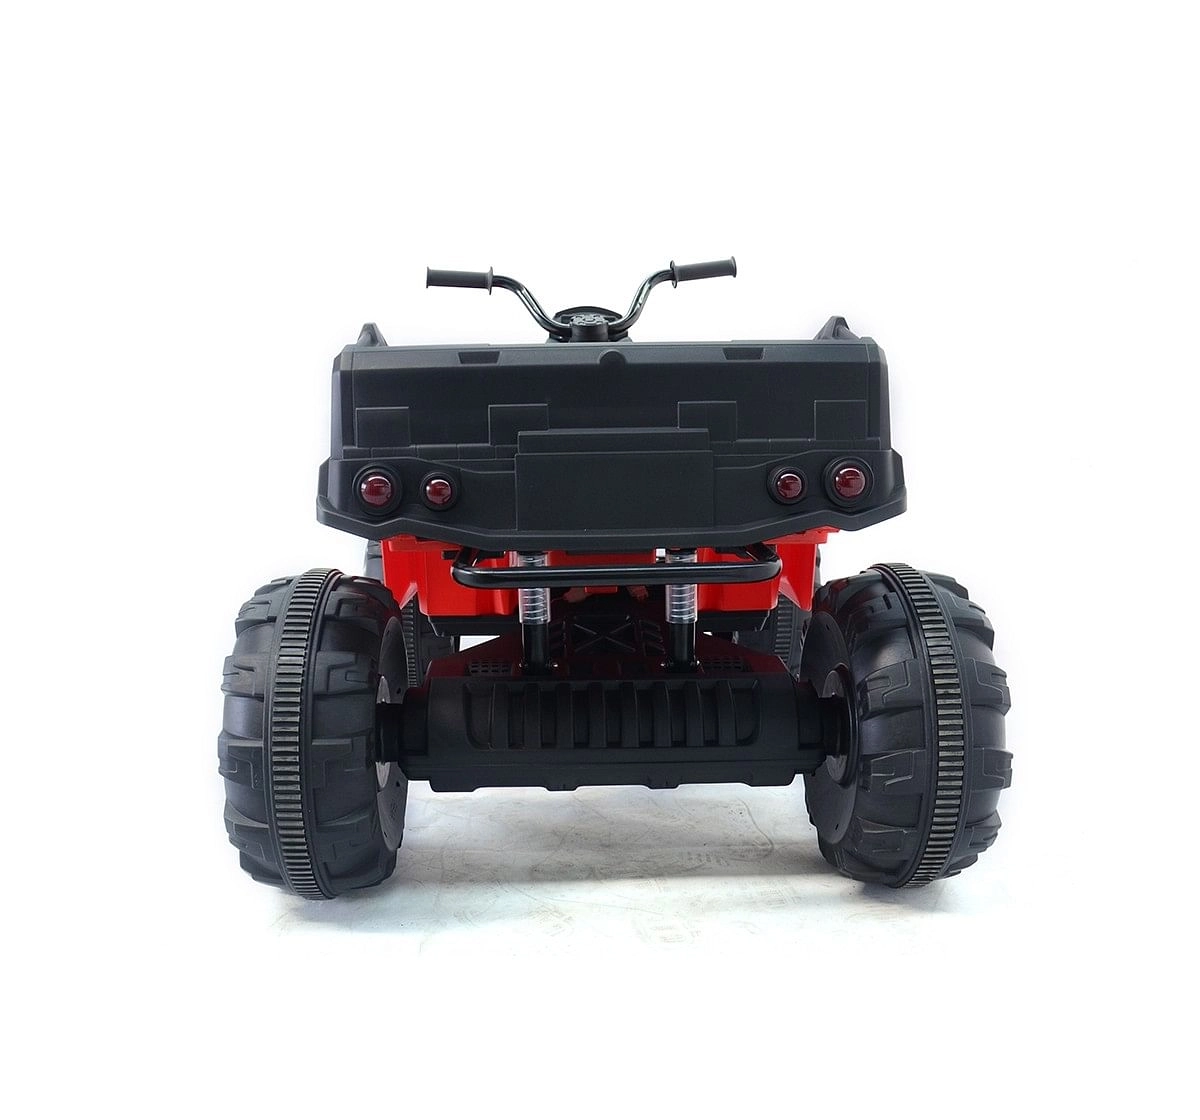 Bettyma Atv Rc Buggy 2.5Ghz - Red Battery Operated Rideons for Kids age 3Y+ (Red)